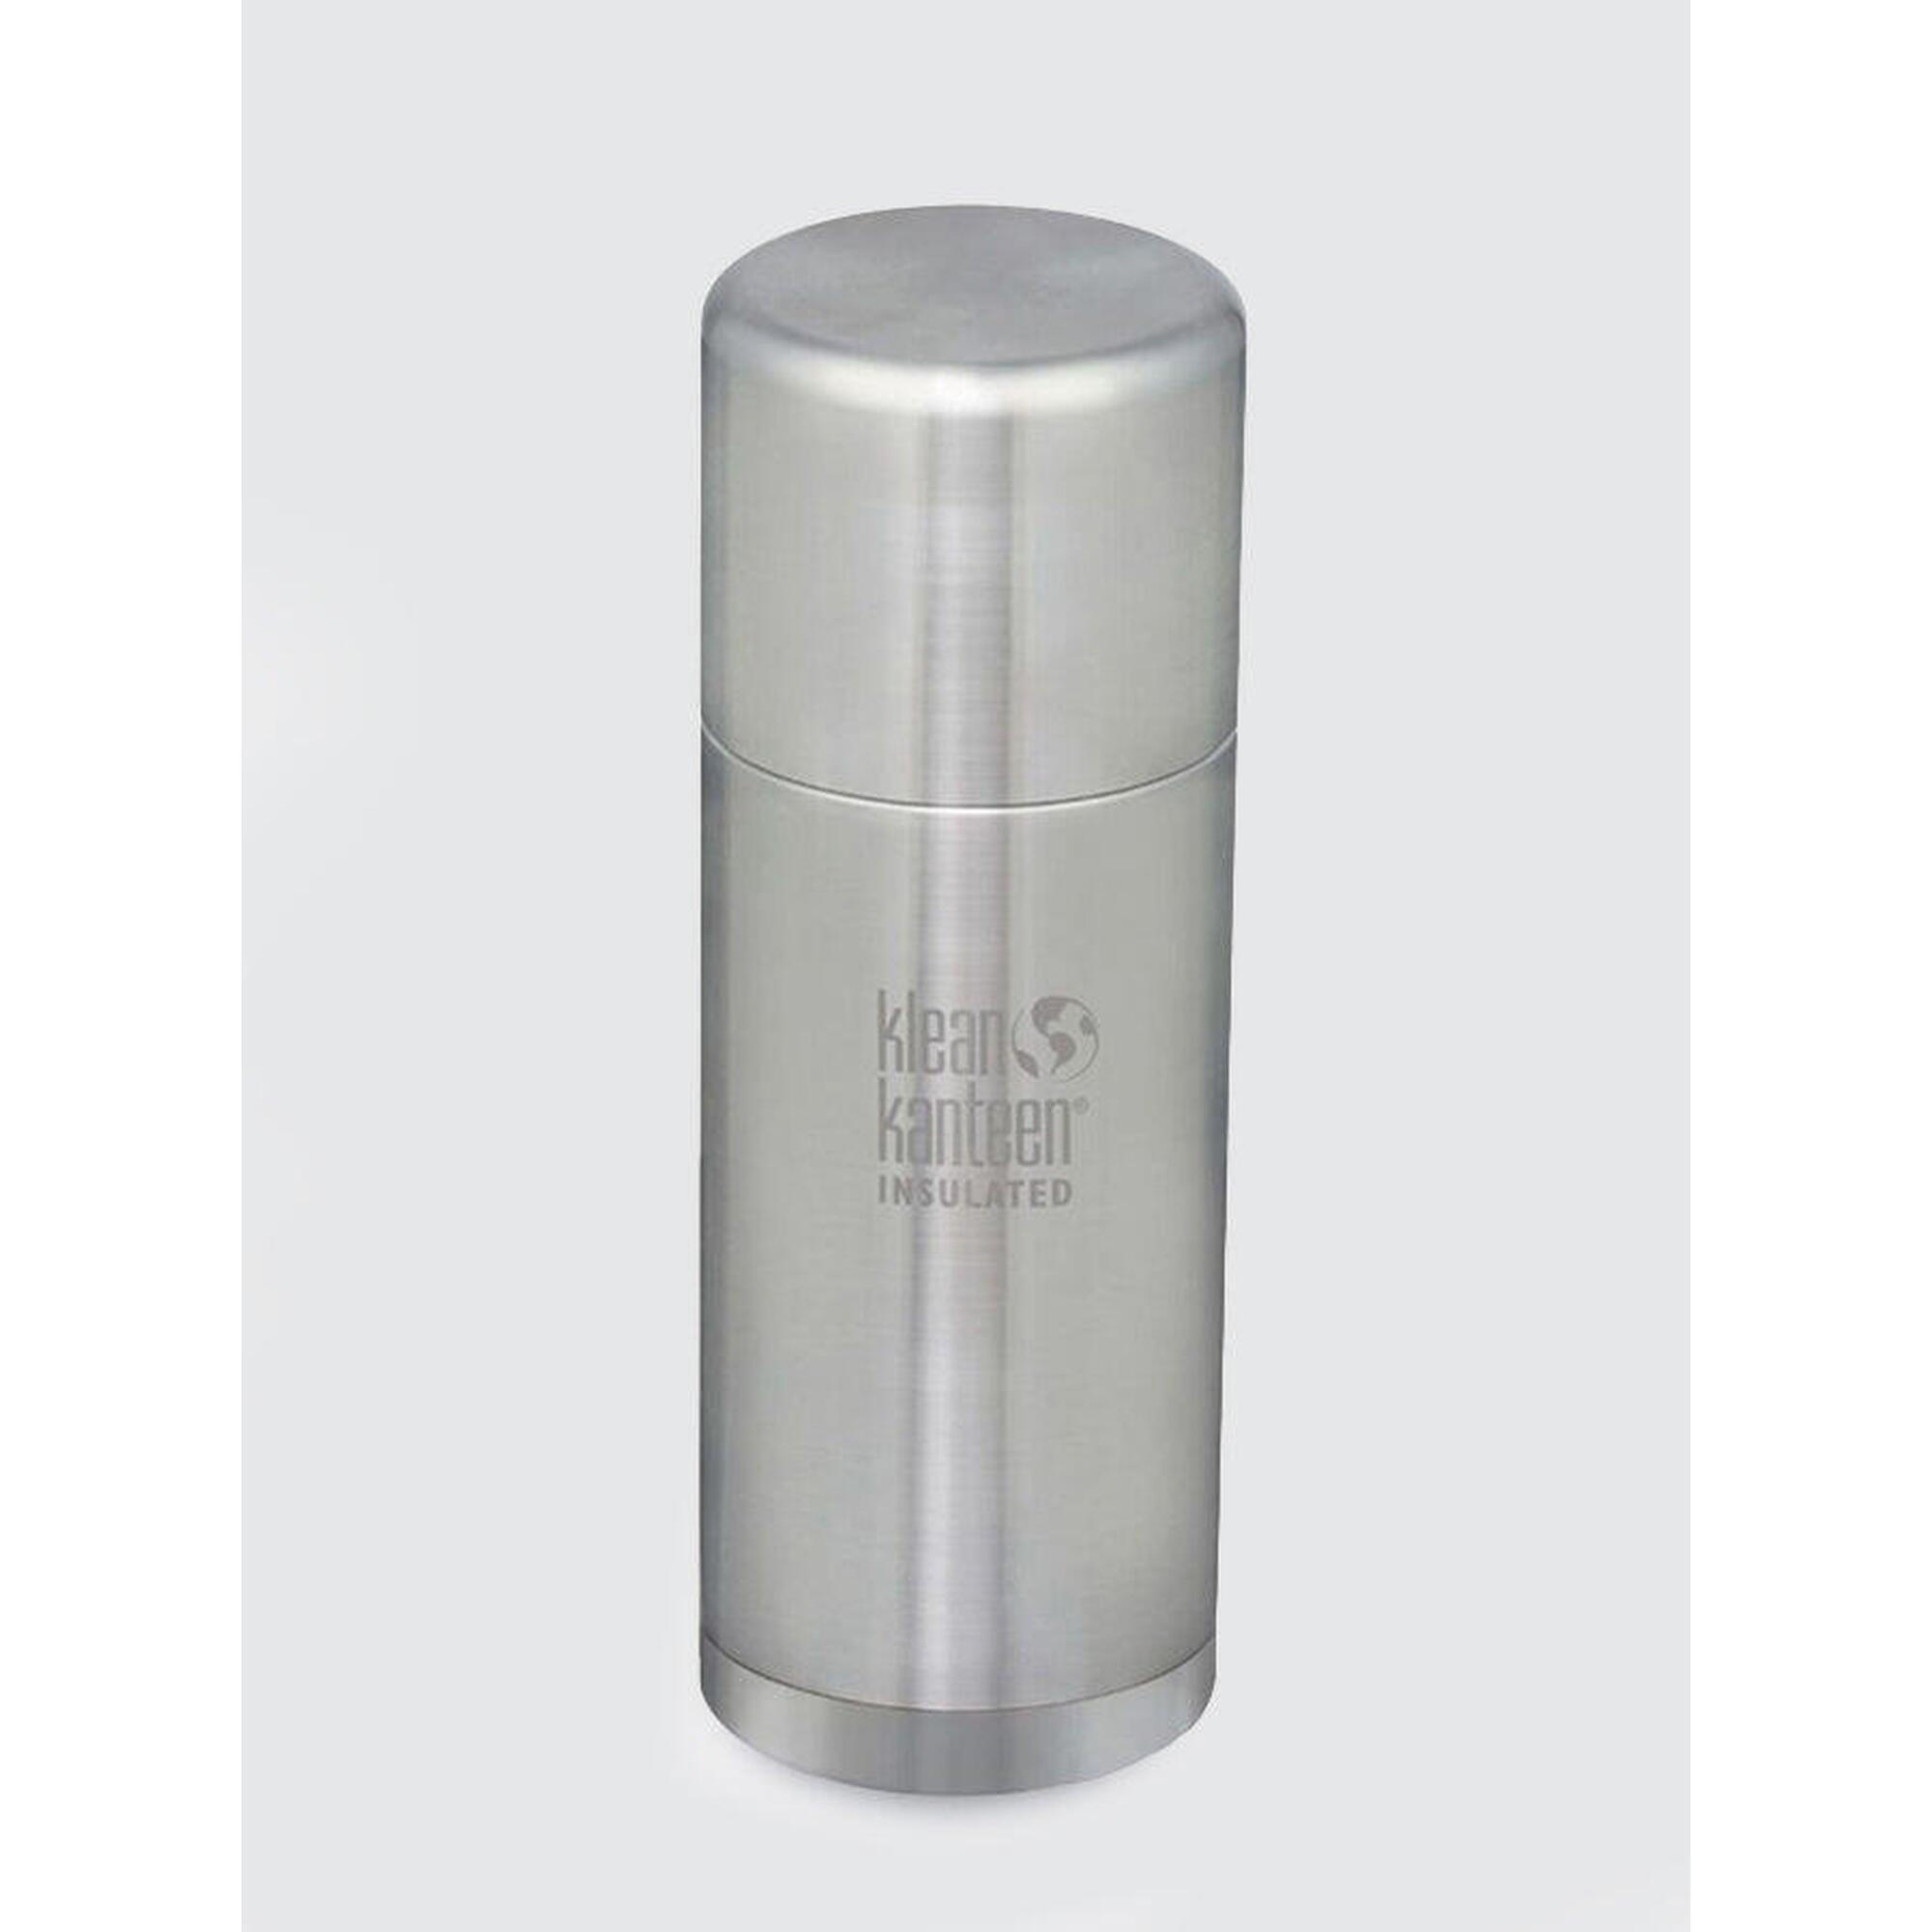 Klean Kanteen TK-Pro Insulated Flask 25oz (750ml) - Brushed Stainless 1/4